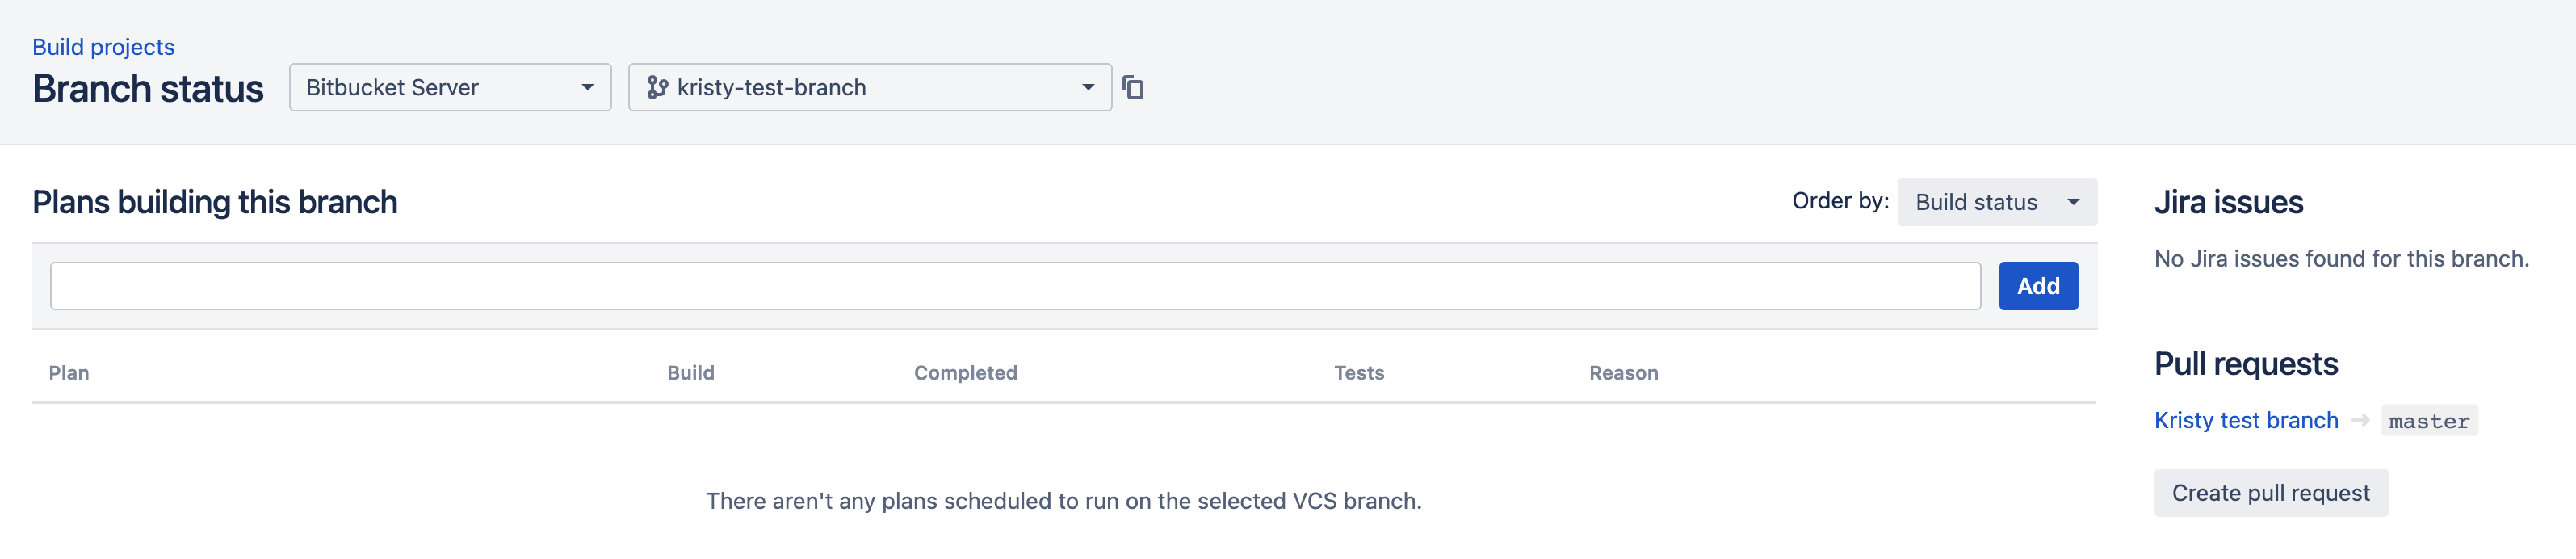 Pull requests on branch status page